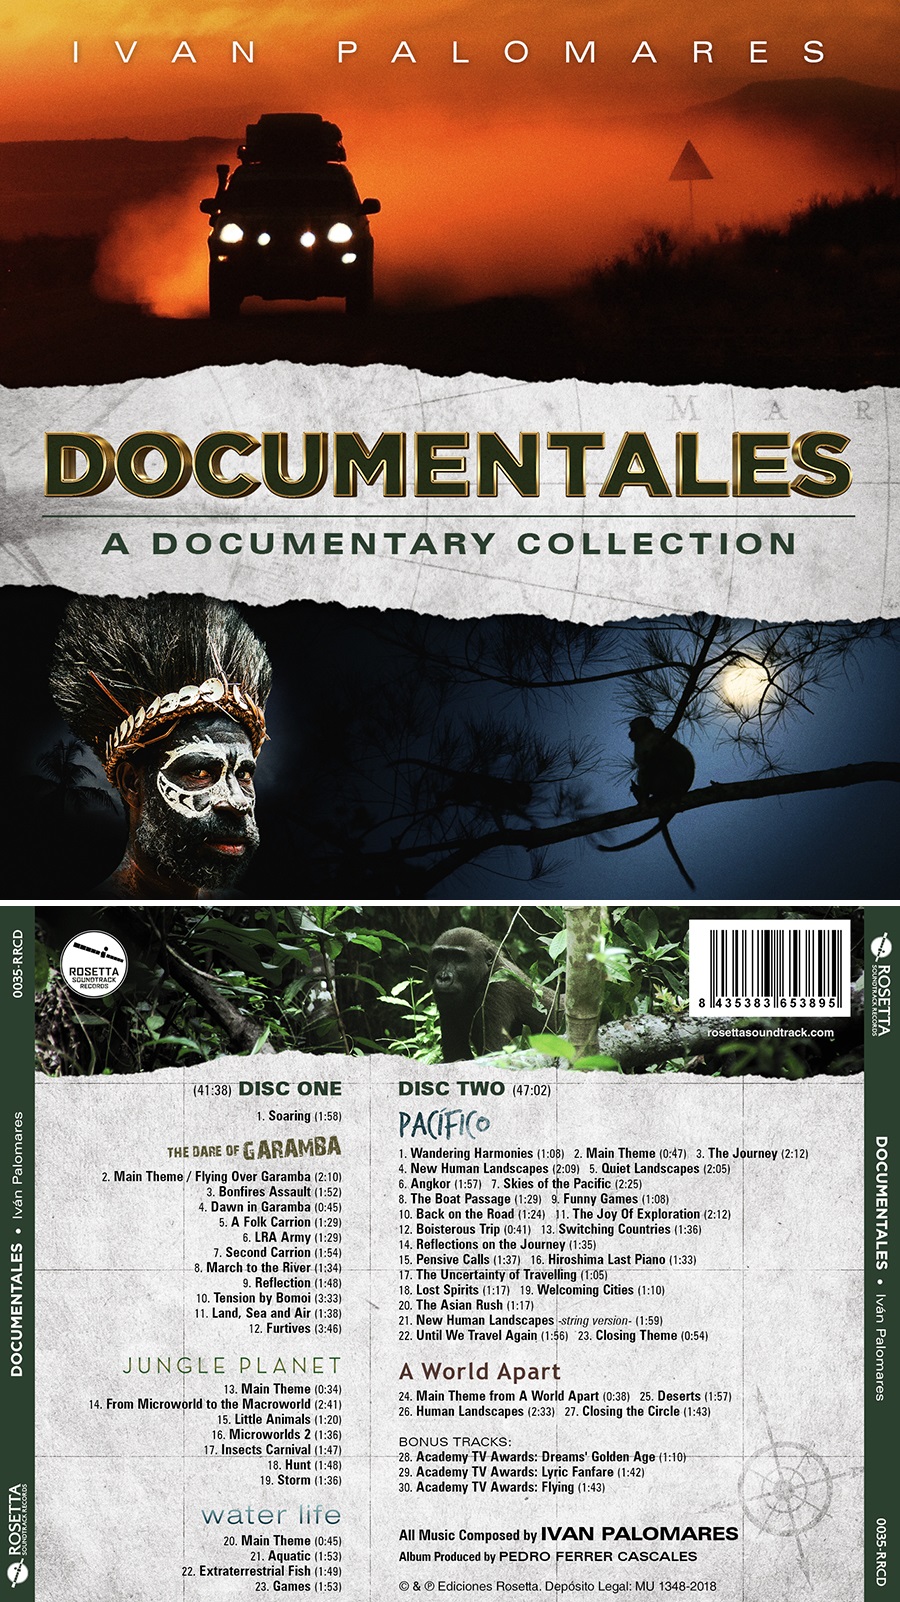 Documentales: A Documentary Collection